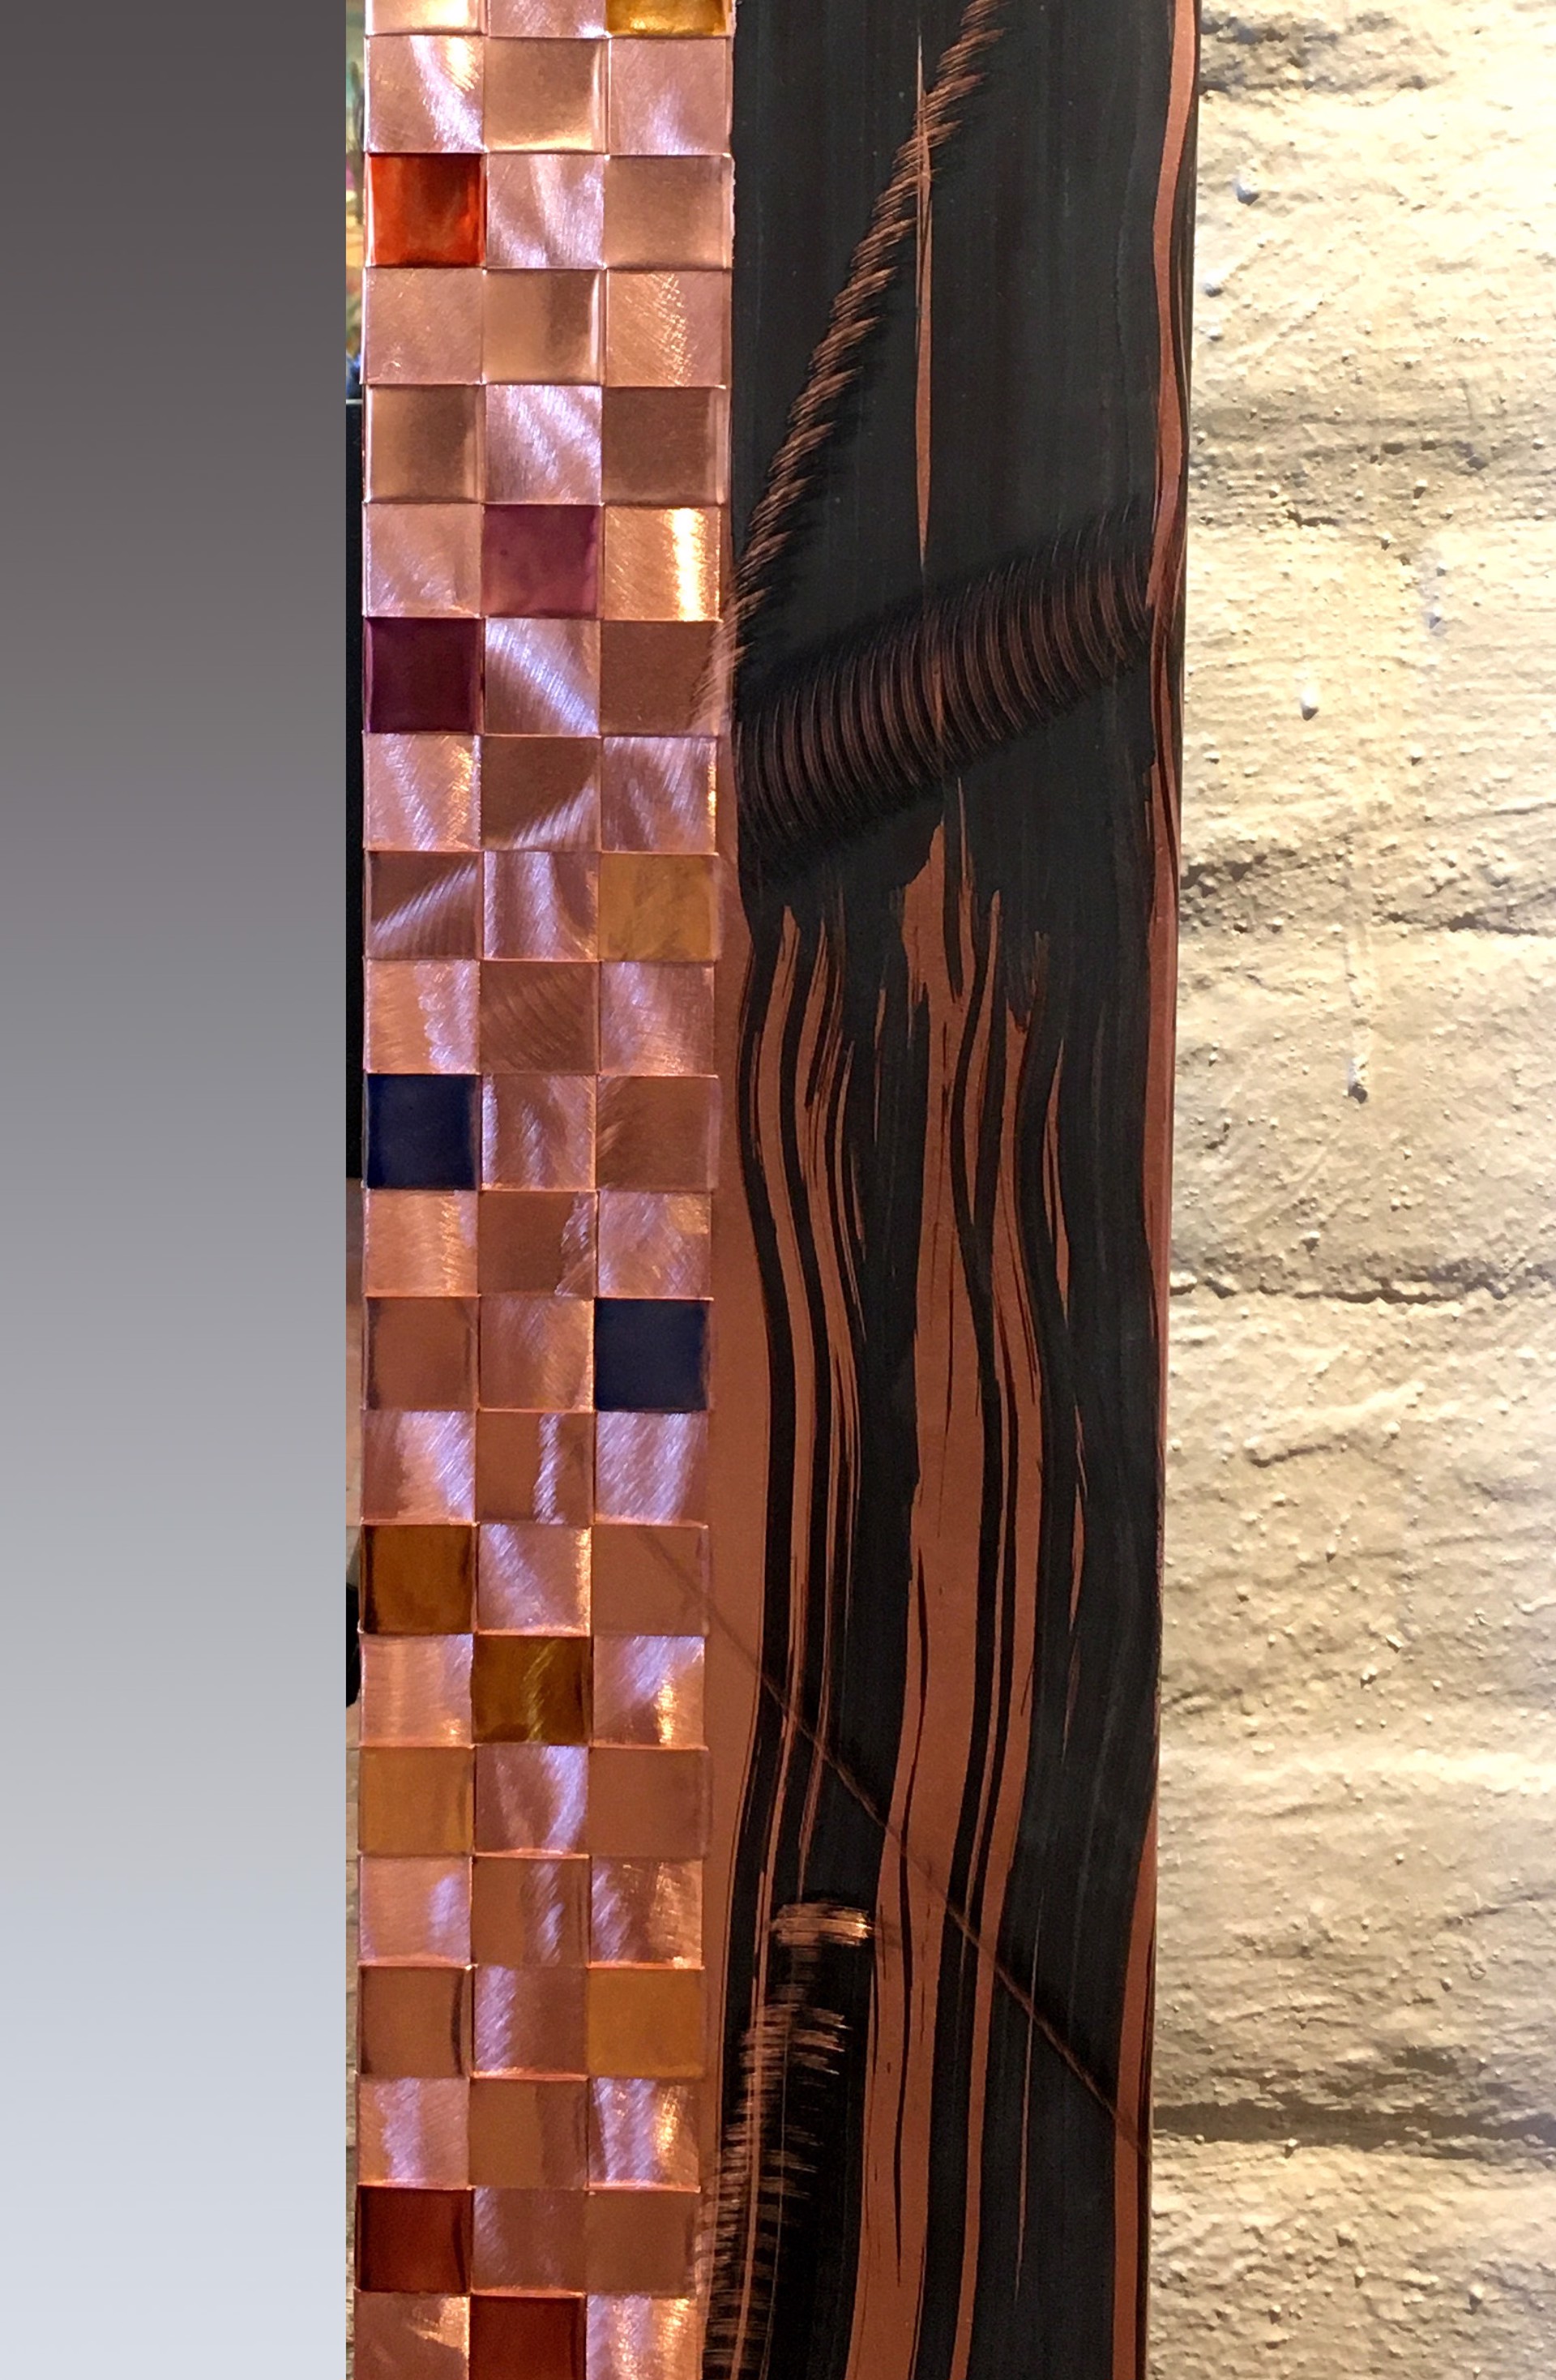 Copper or Steel Barn Door ~ Available for commissions in custom sizes and designs. by Jean And Tom Heffernan